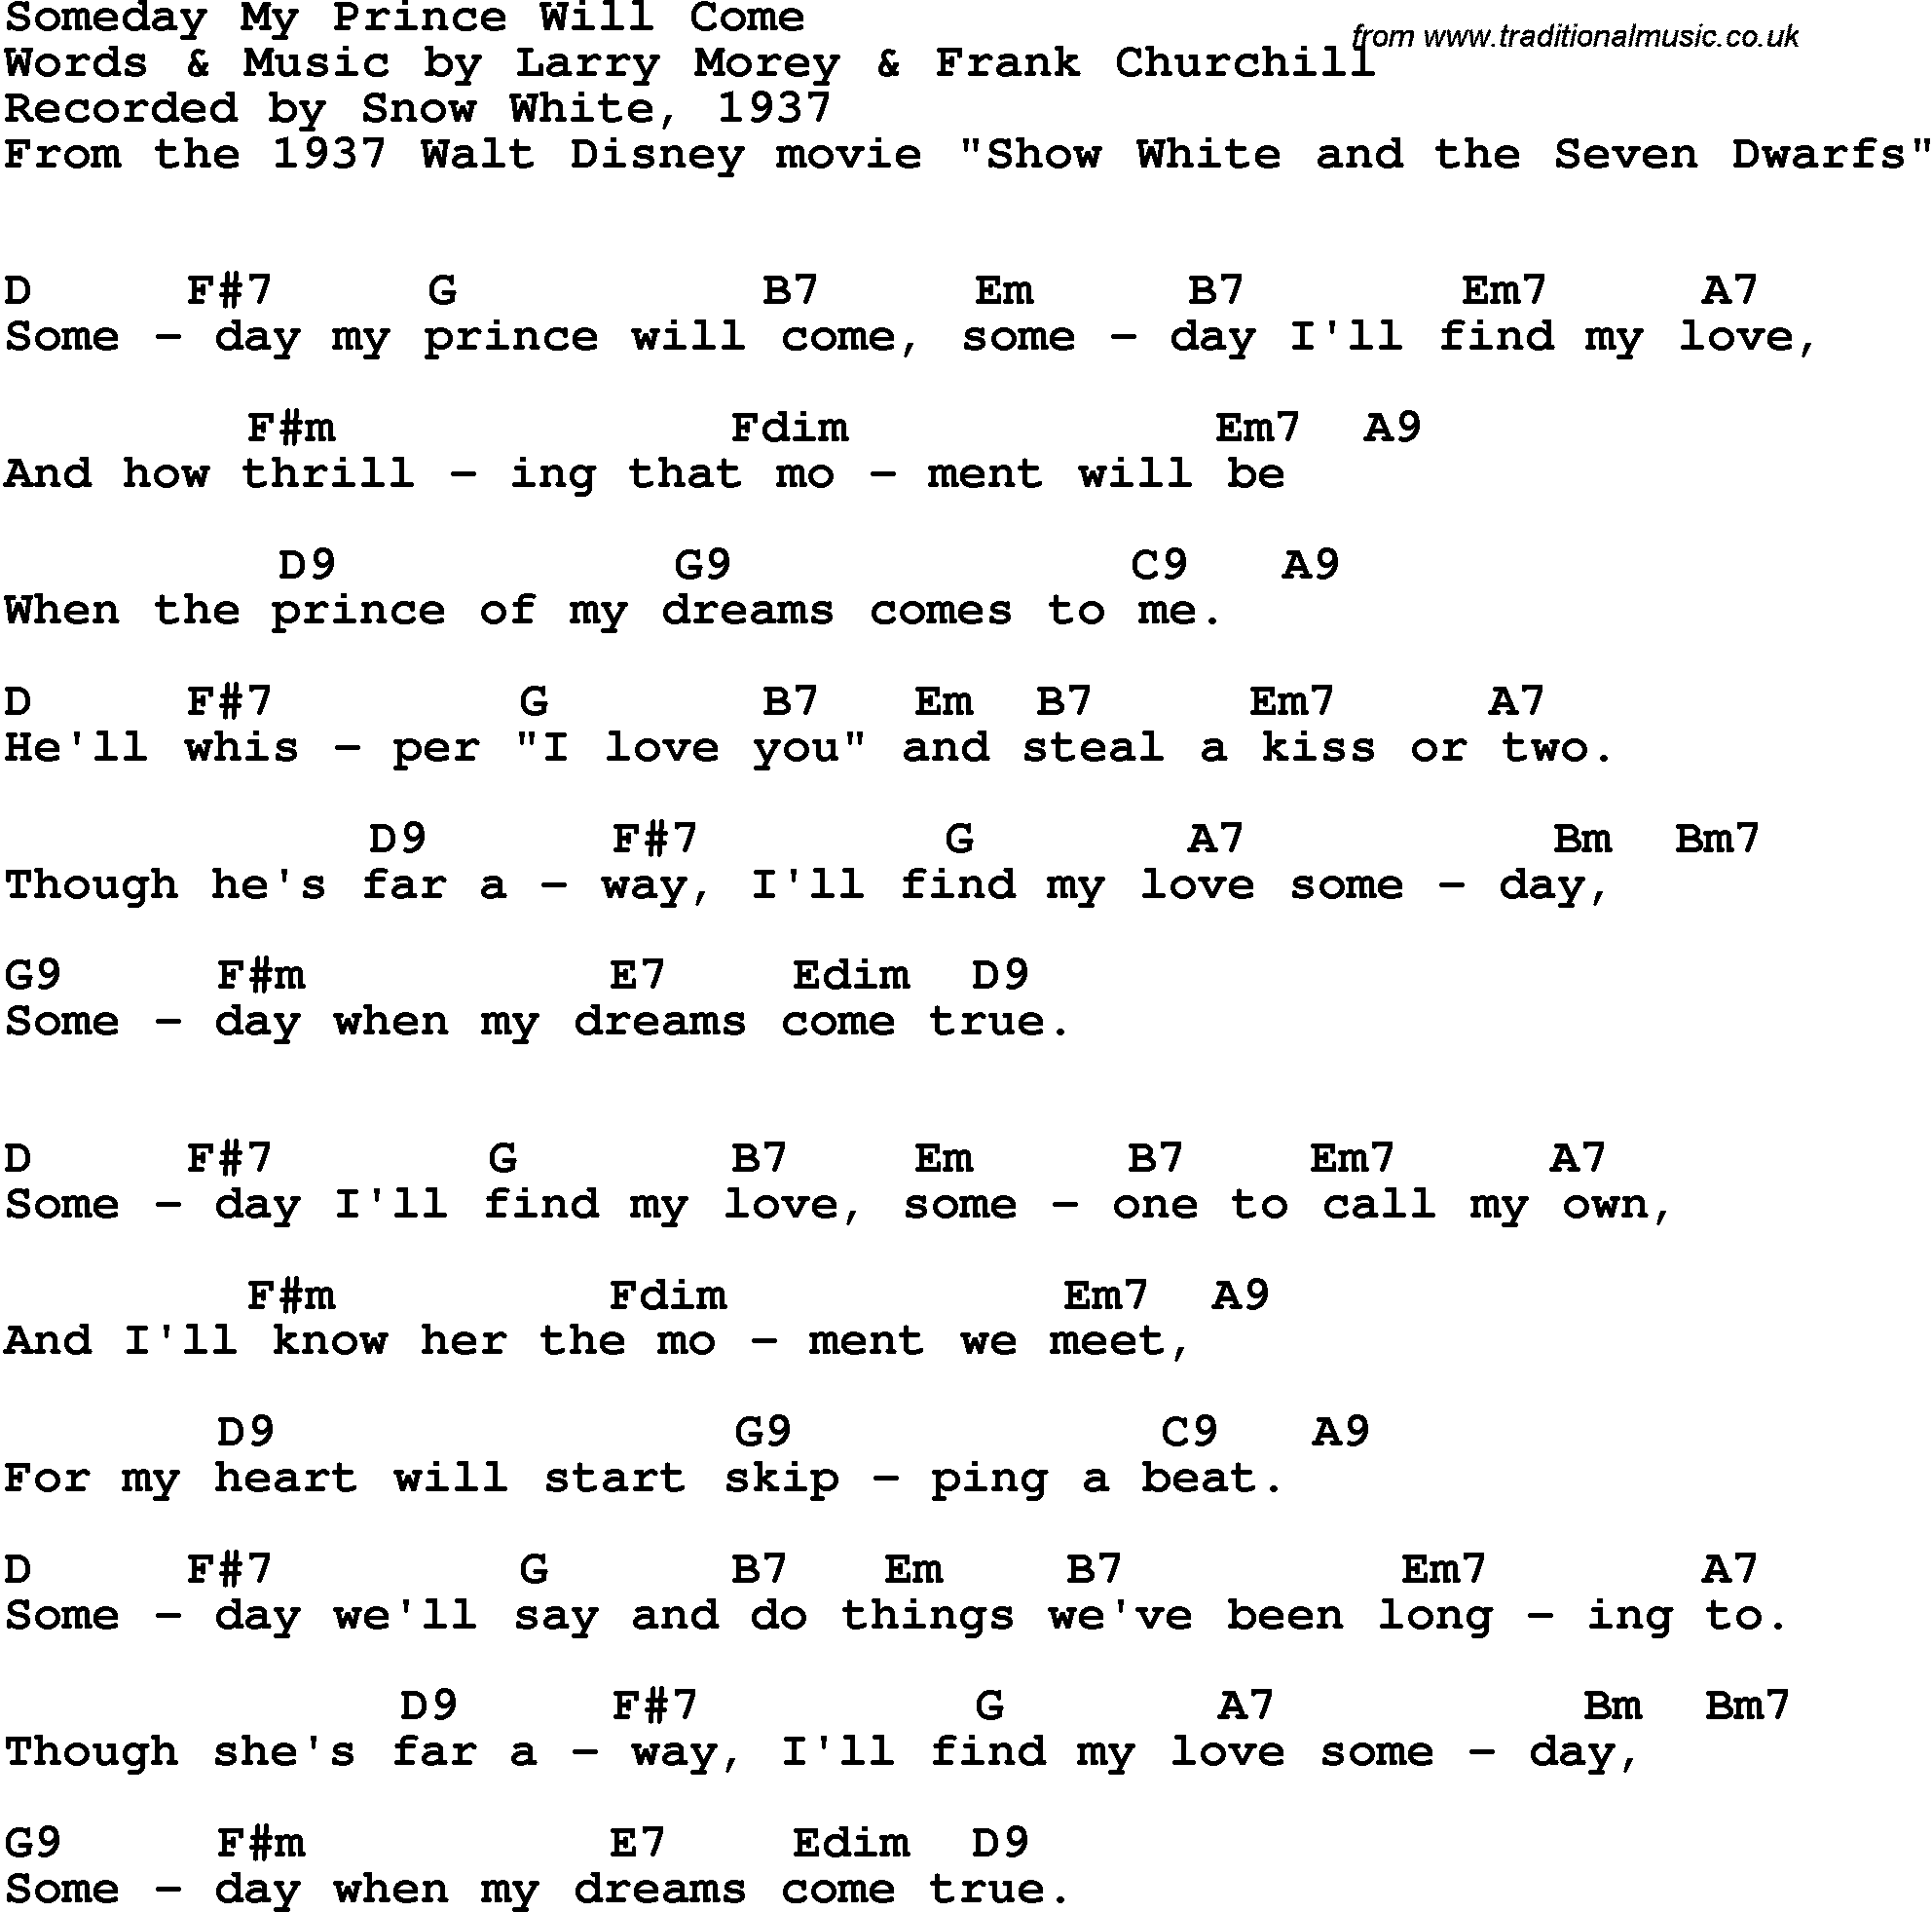 Song Lyrics with guitar chords for Someday My Prince Will Come - Adriana Caselotti, 1937